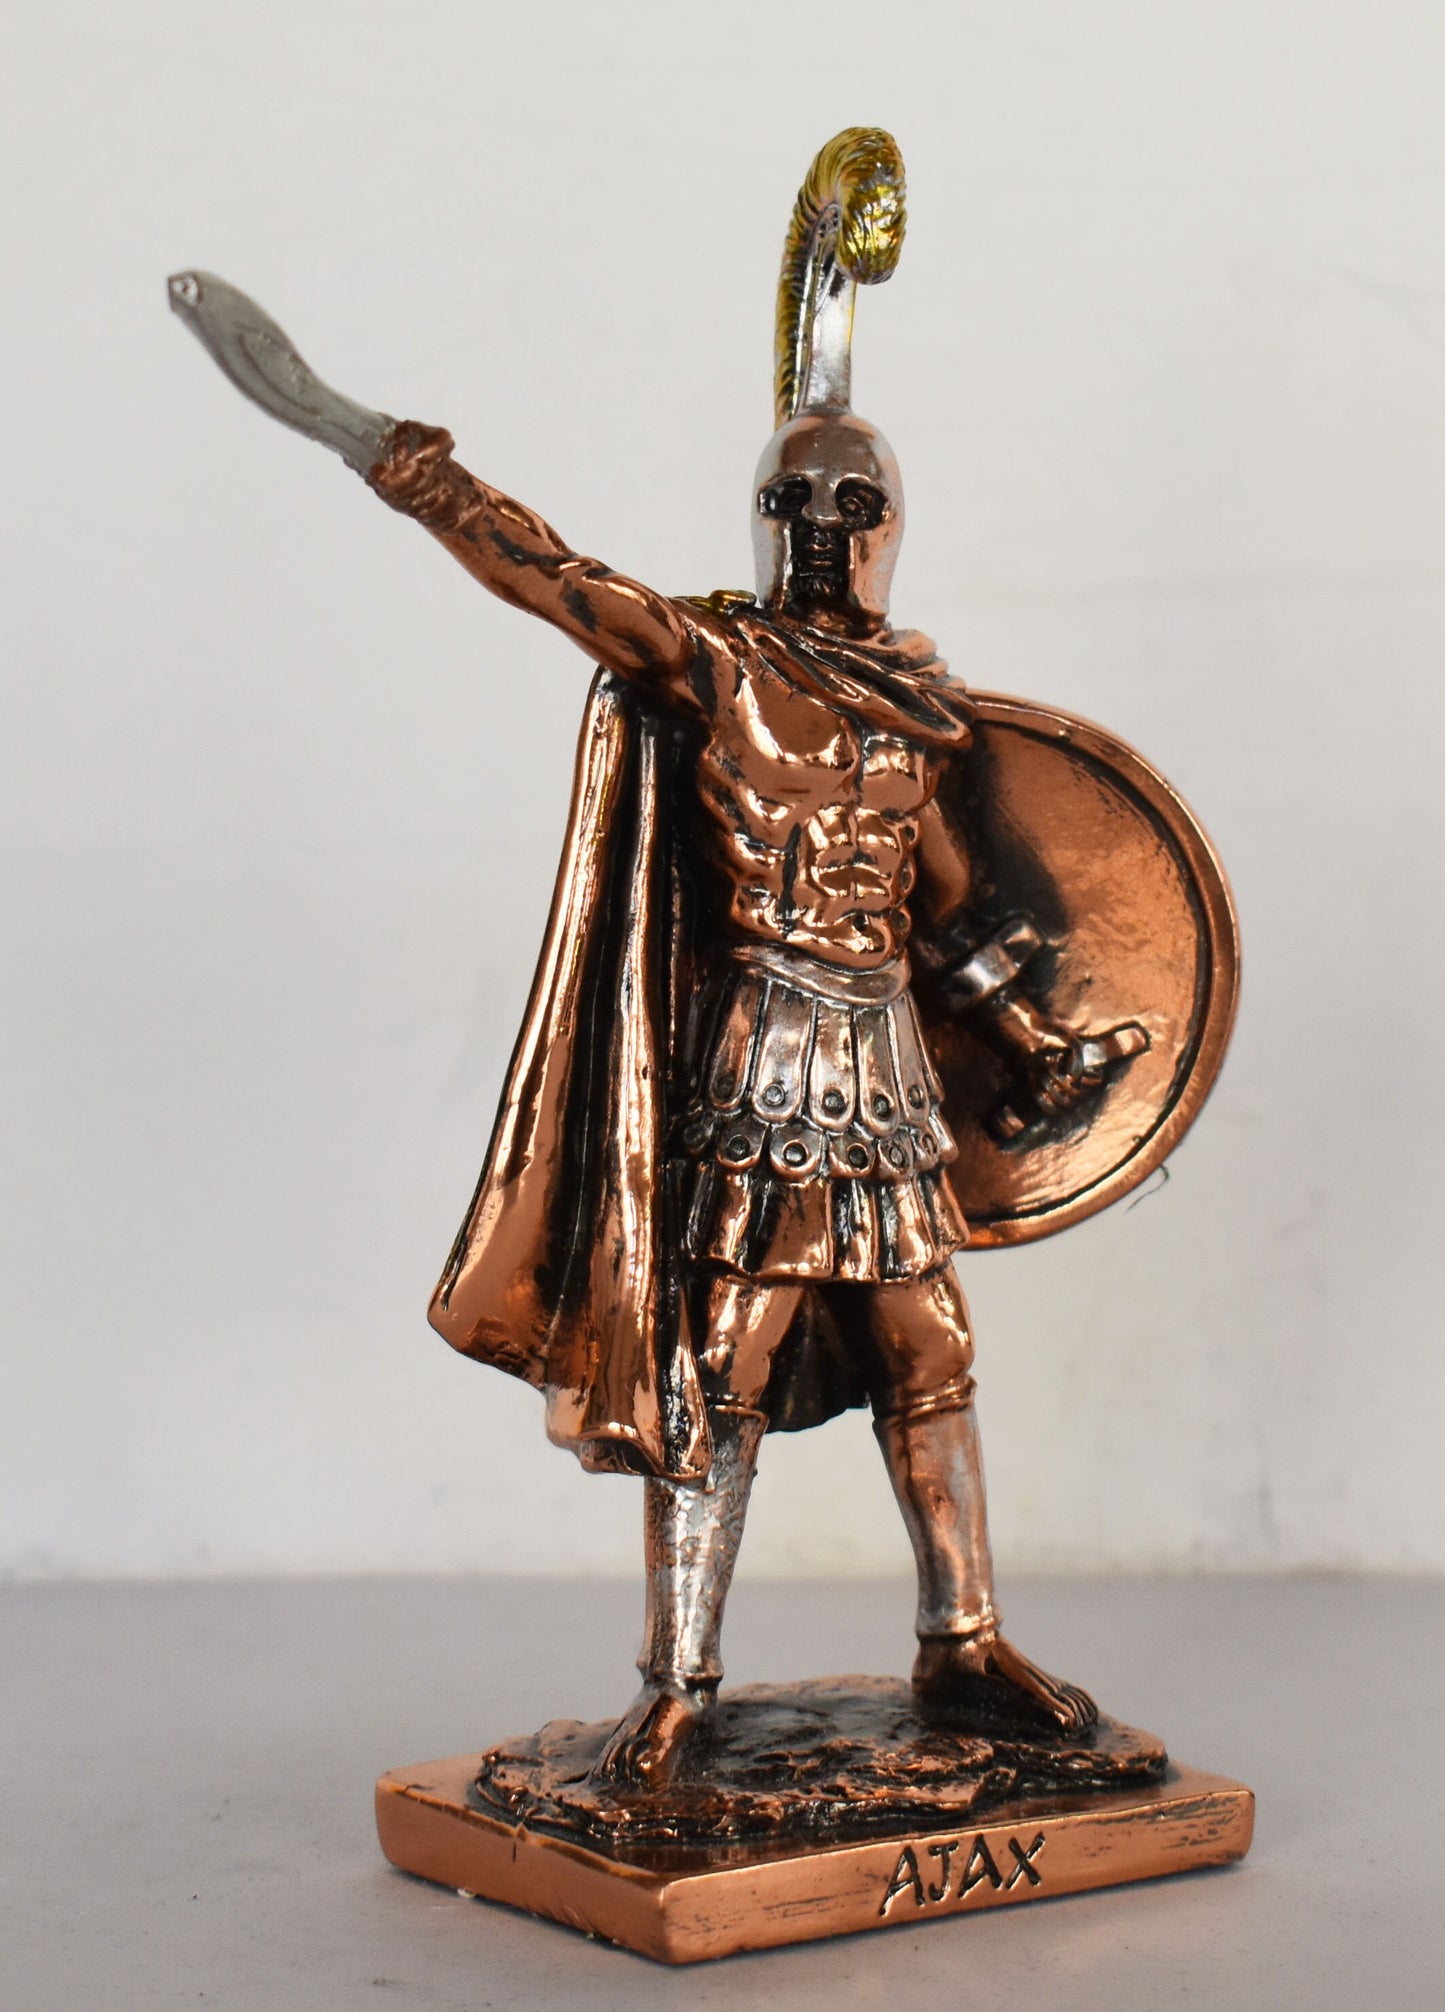 Ajax the Great - Son of Telamon, King of Salamis - Hero of Trojan War - Warrior of Great Courage - Copper Plated Alabaster